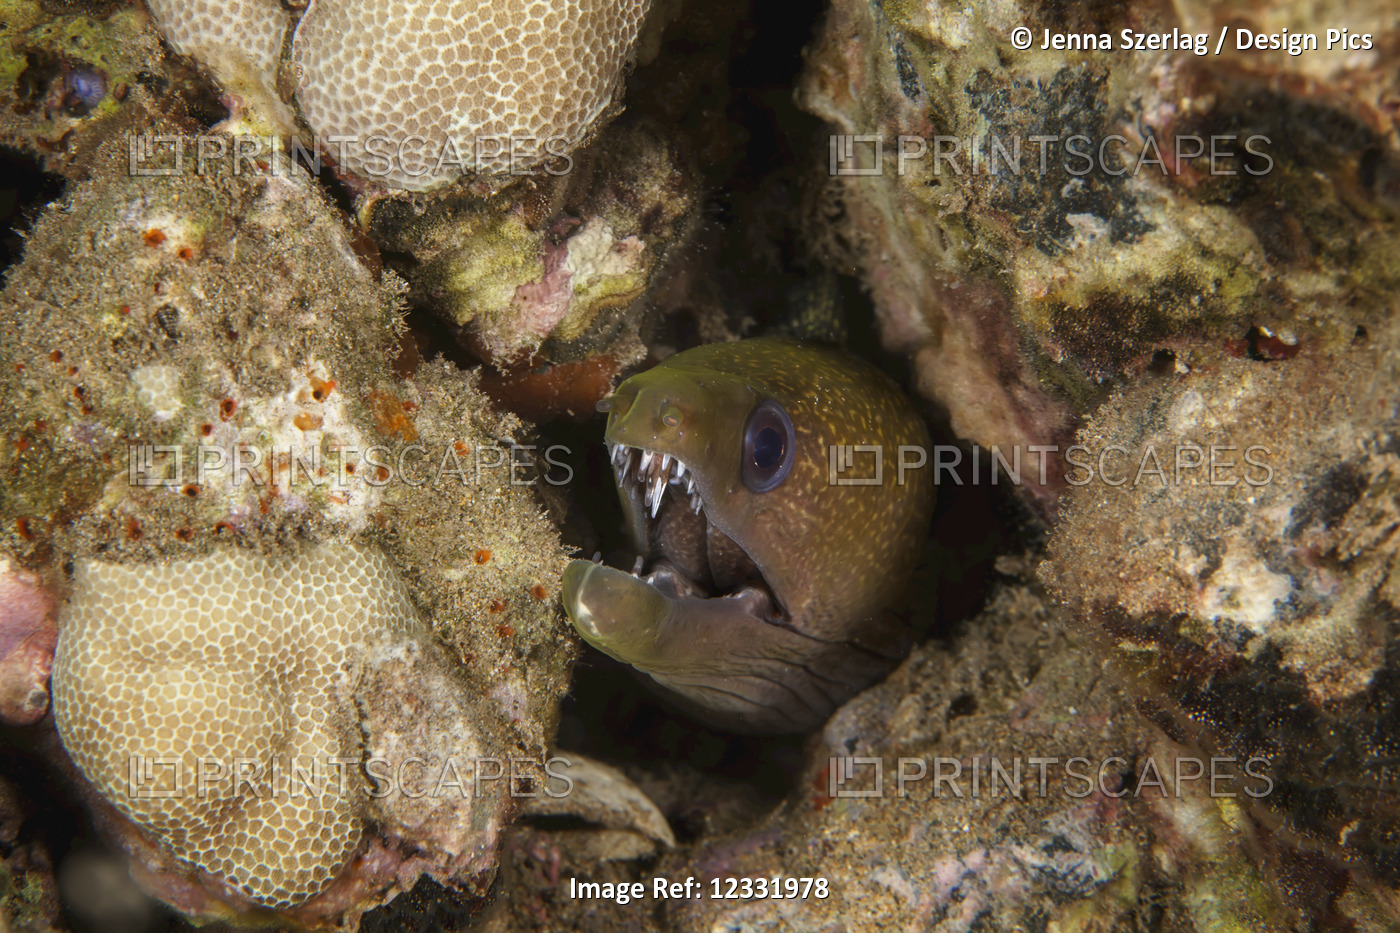 A close-up underwater view of a Yellowmargin Moray eel (Gymnothorax ...